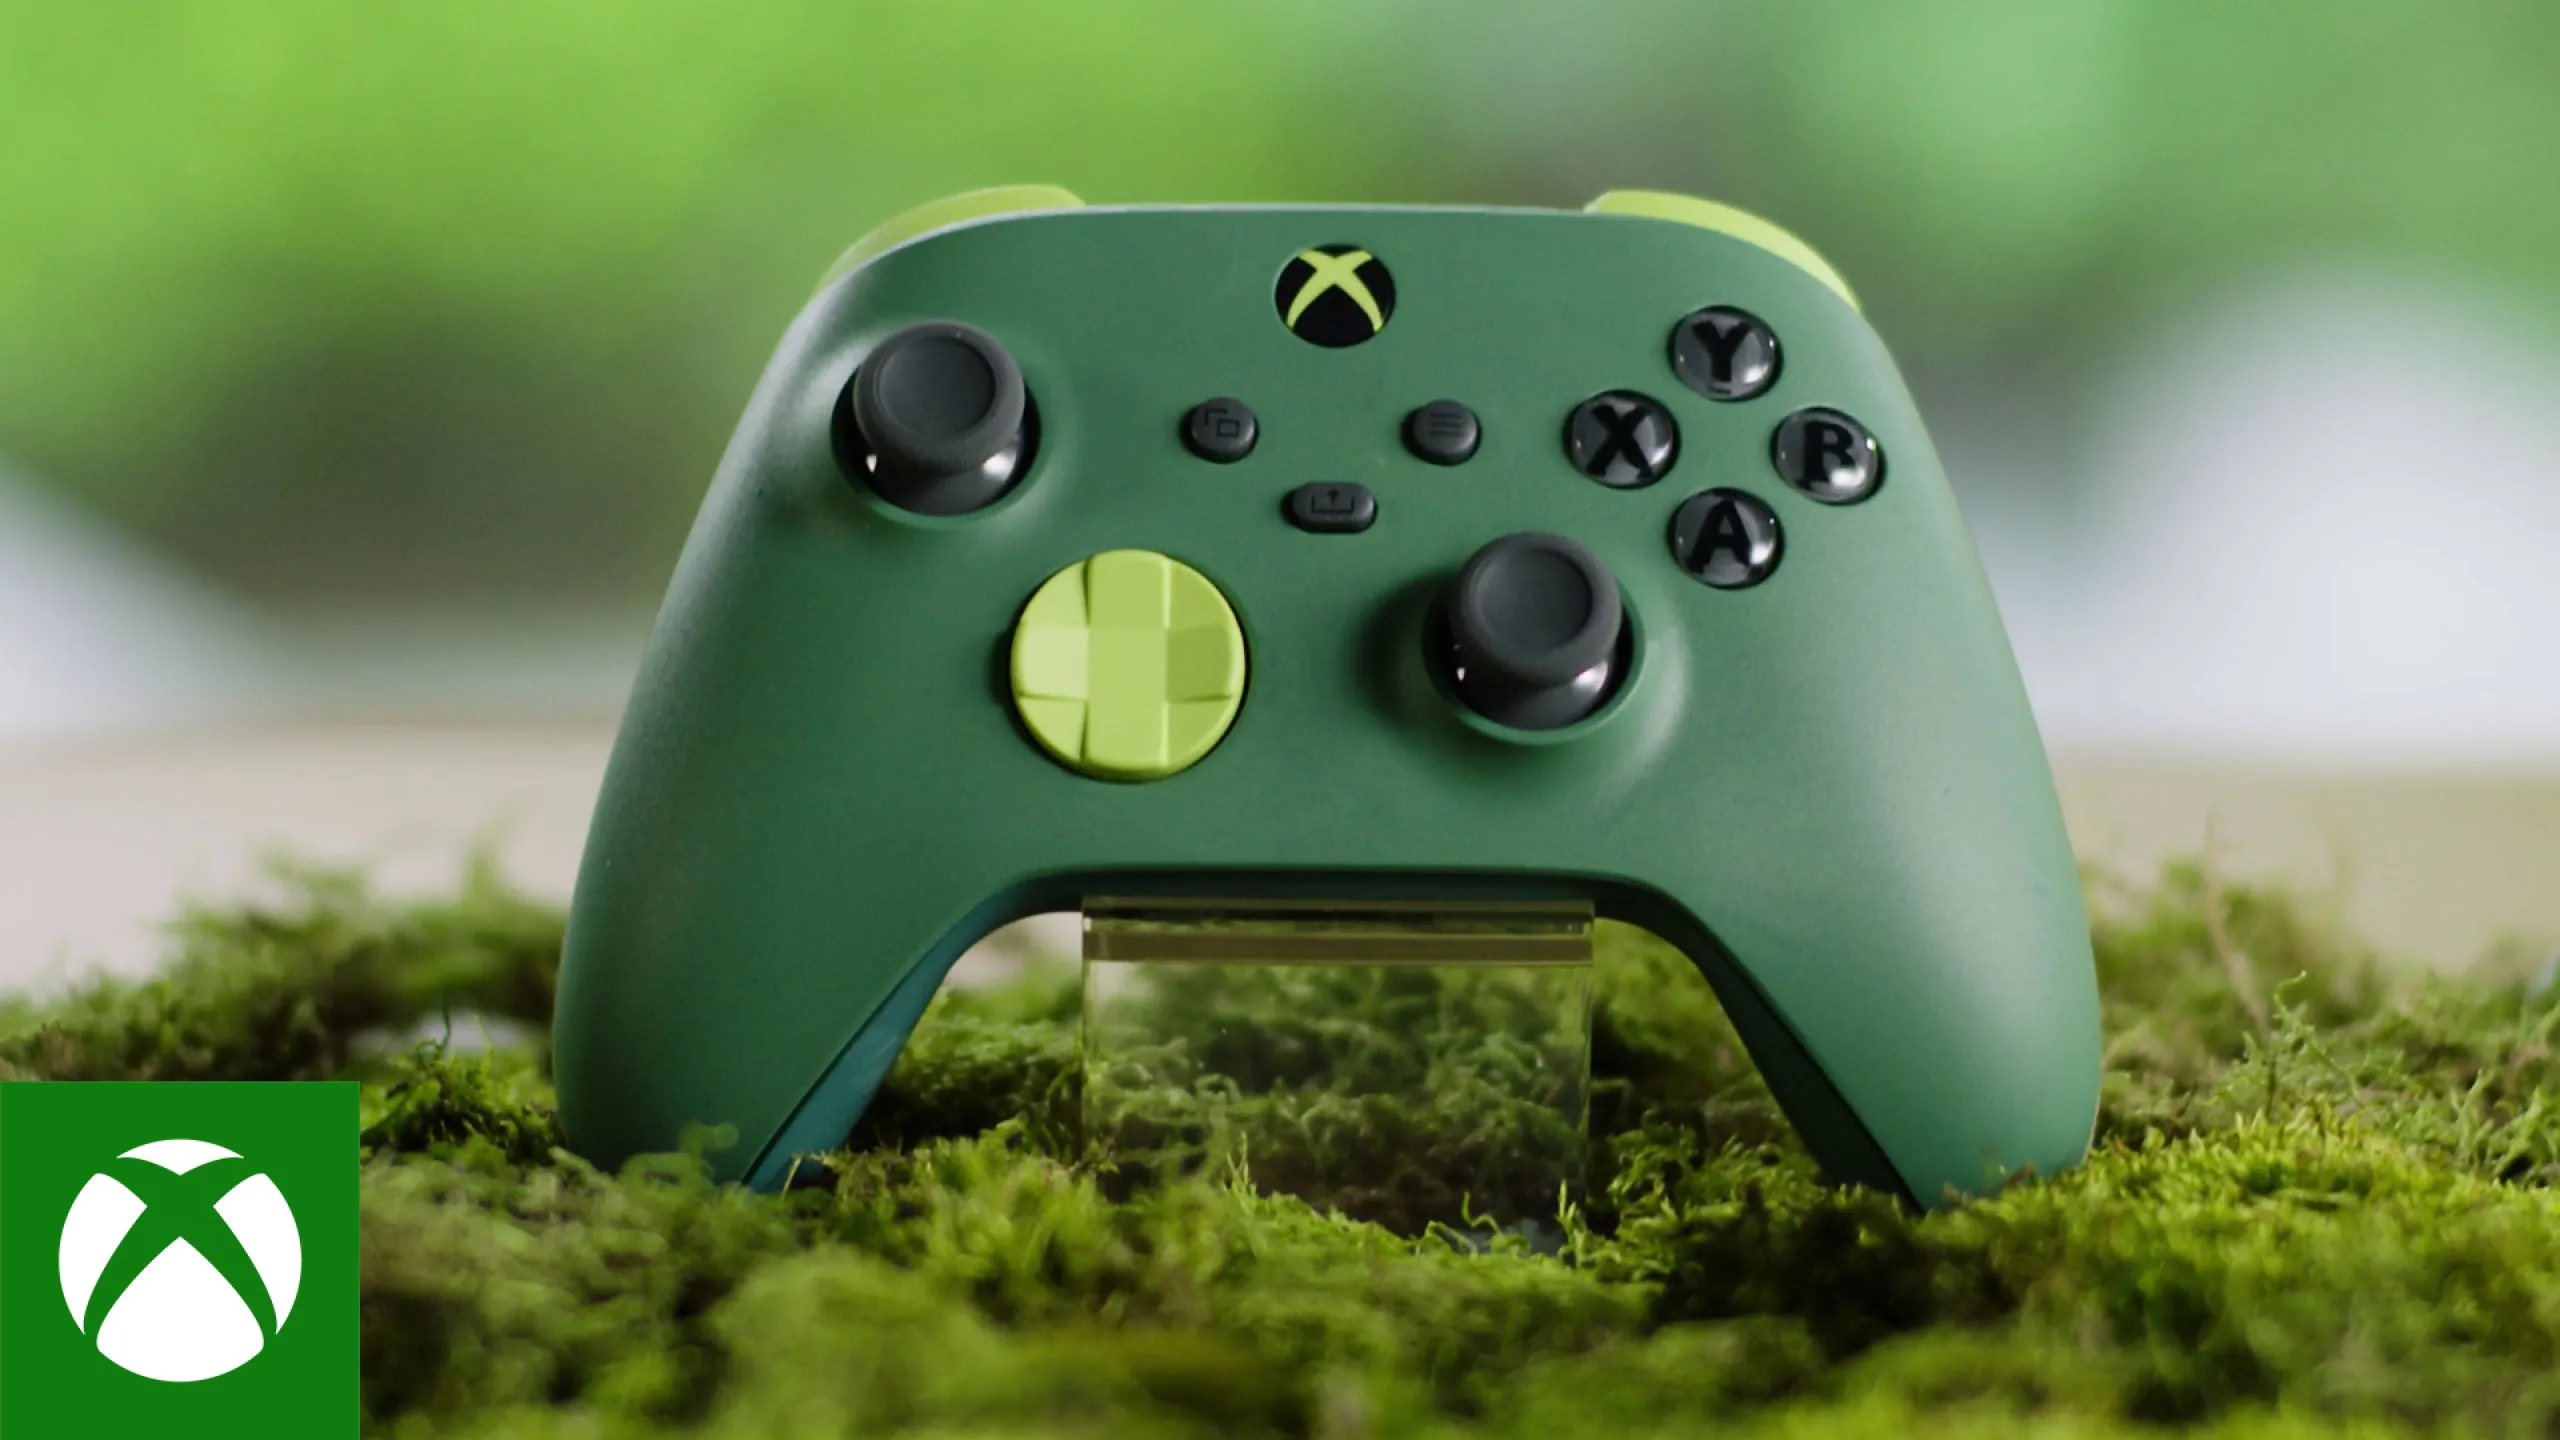 Image of the Xbox Remix controller on a patch of grass.